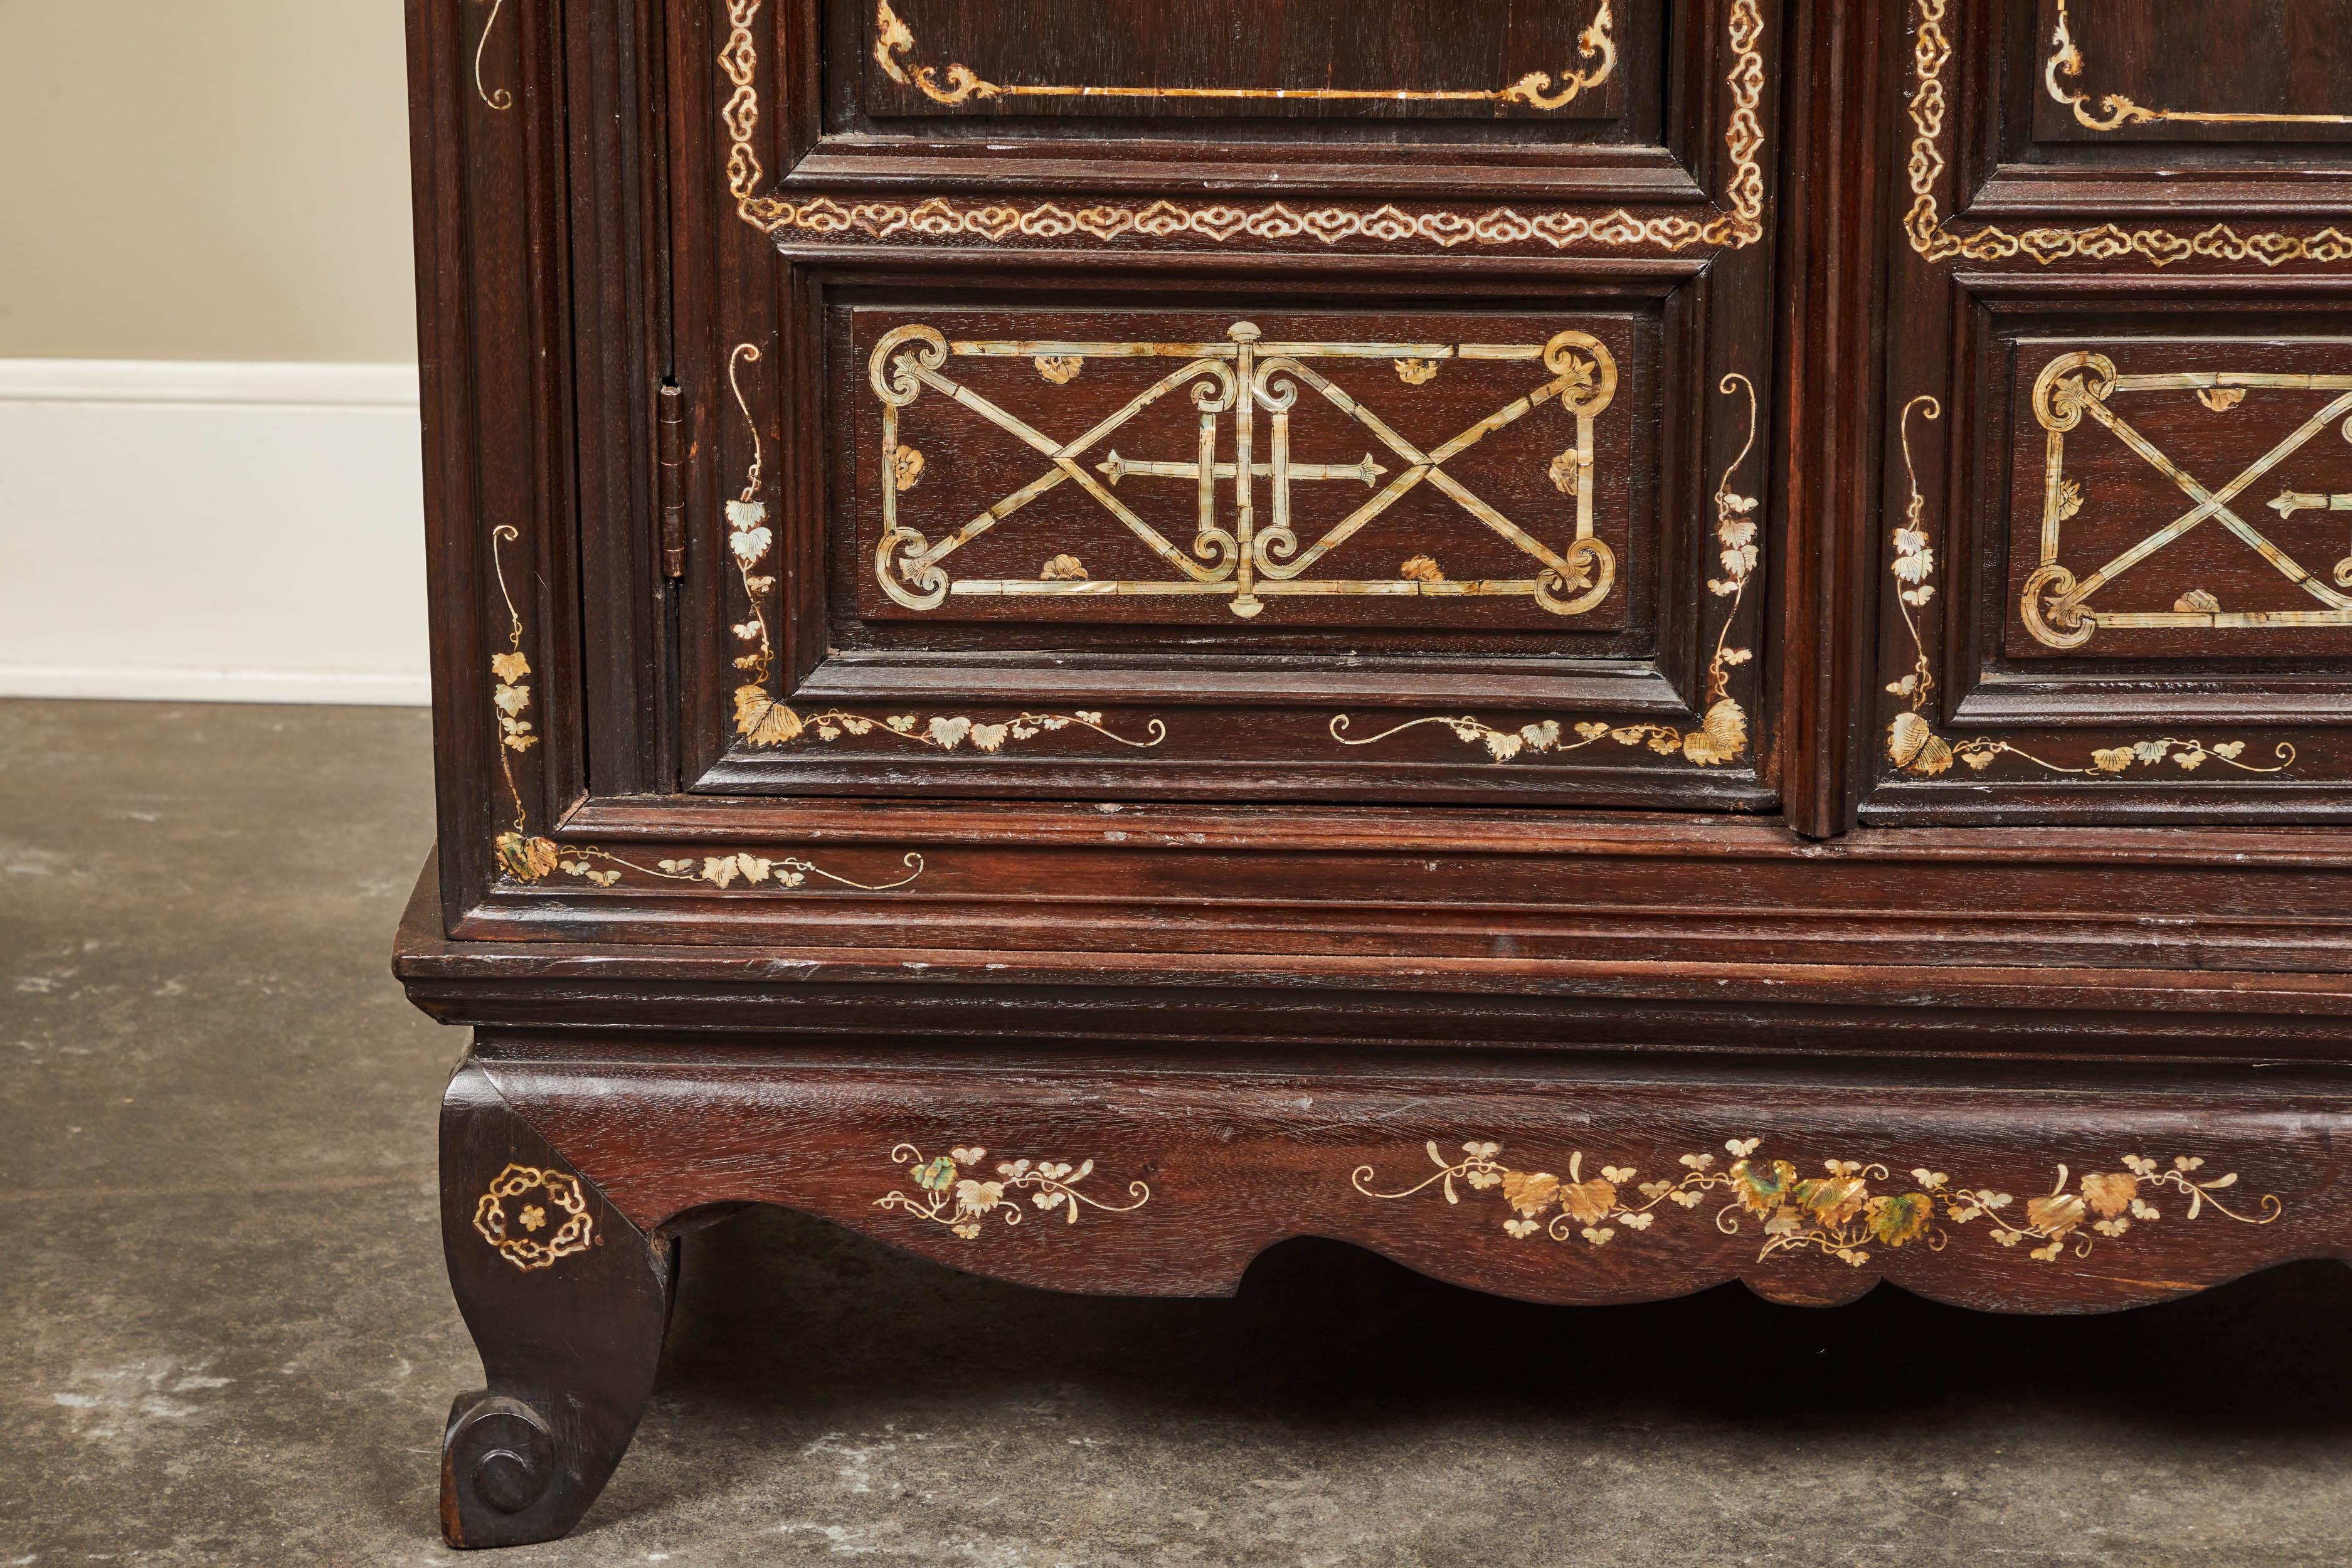 A solid rosewood cabinet with the front richly inlaid with mother of pearl depicting birds and a delicate floral motif. Made in Vietnam for the export market. The two doors open to reveal a compartment divided by two shelves. All on four slightly